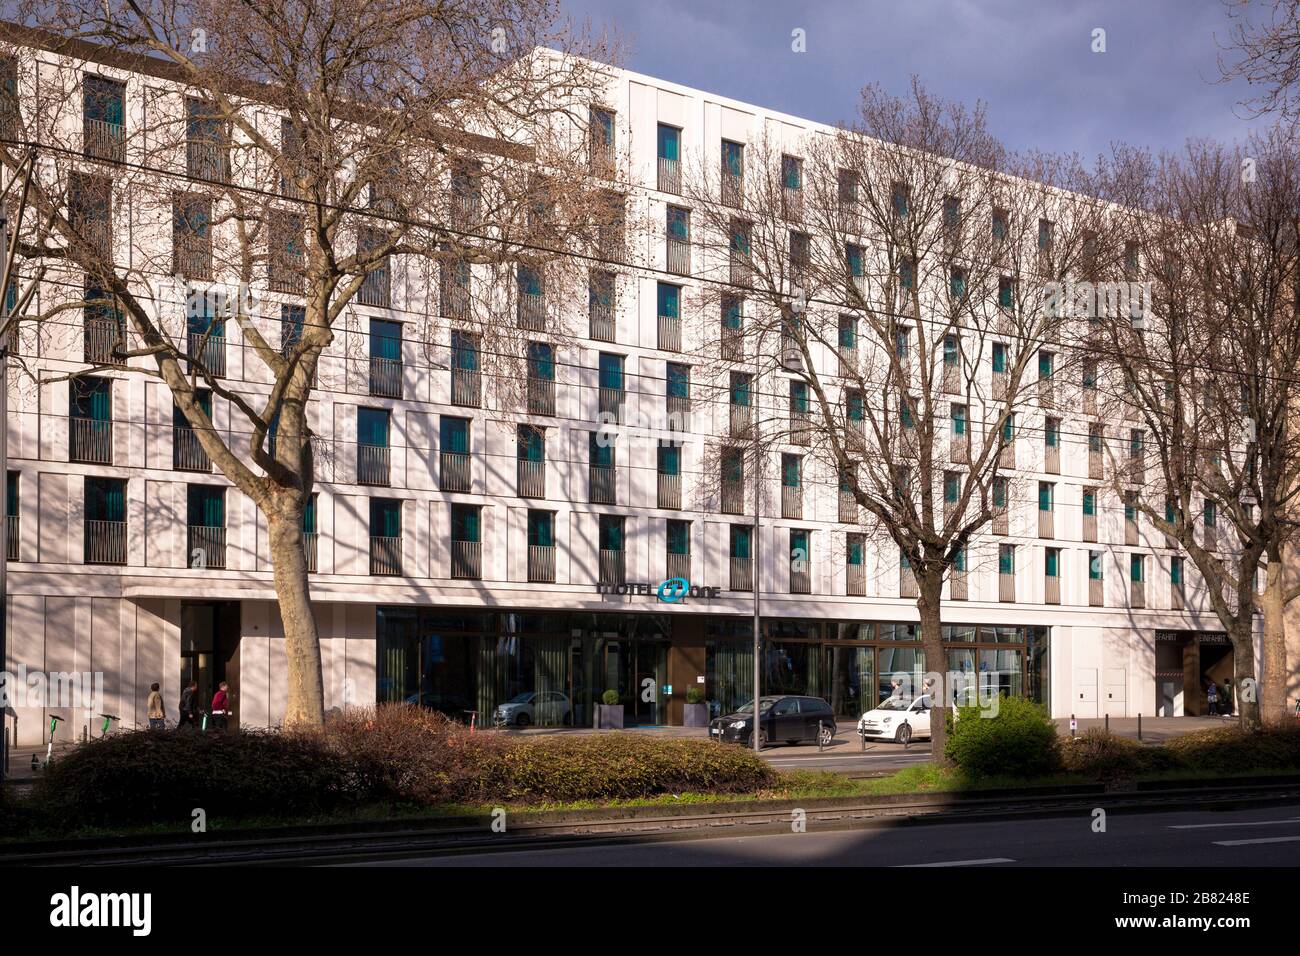 the Motel One Hotel on the street Caecilienstrasse, Cologne, Germany.  das Motel One Hotel an der Caecilienstrasse, Koeln, Deutschland. Stock Photo